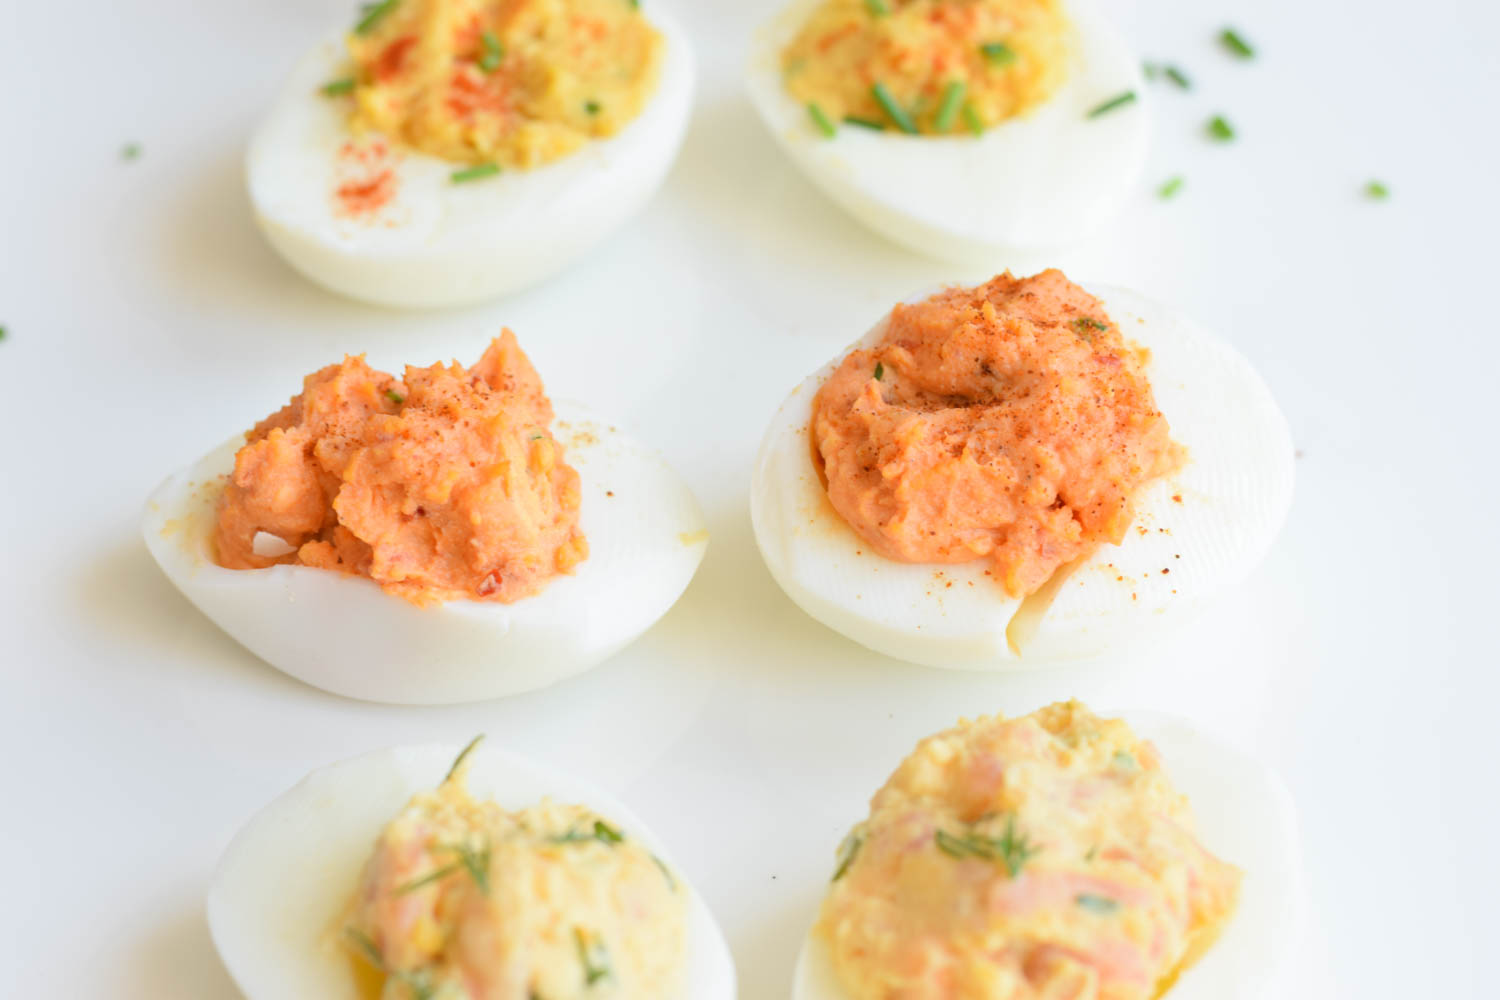 Three types of low  FODMAP devilled eggs together